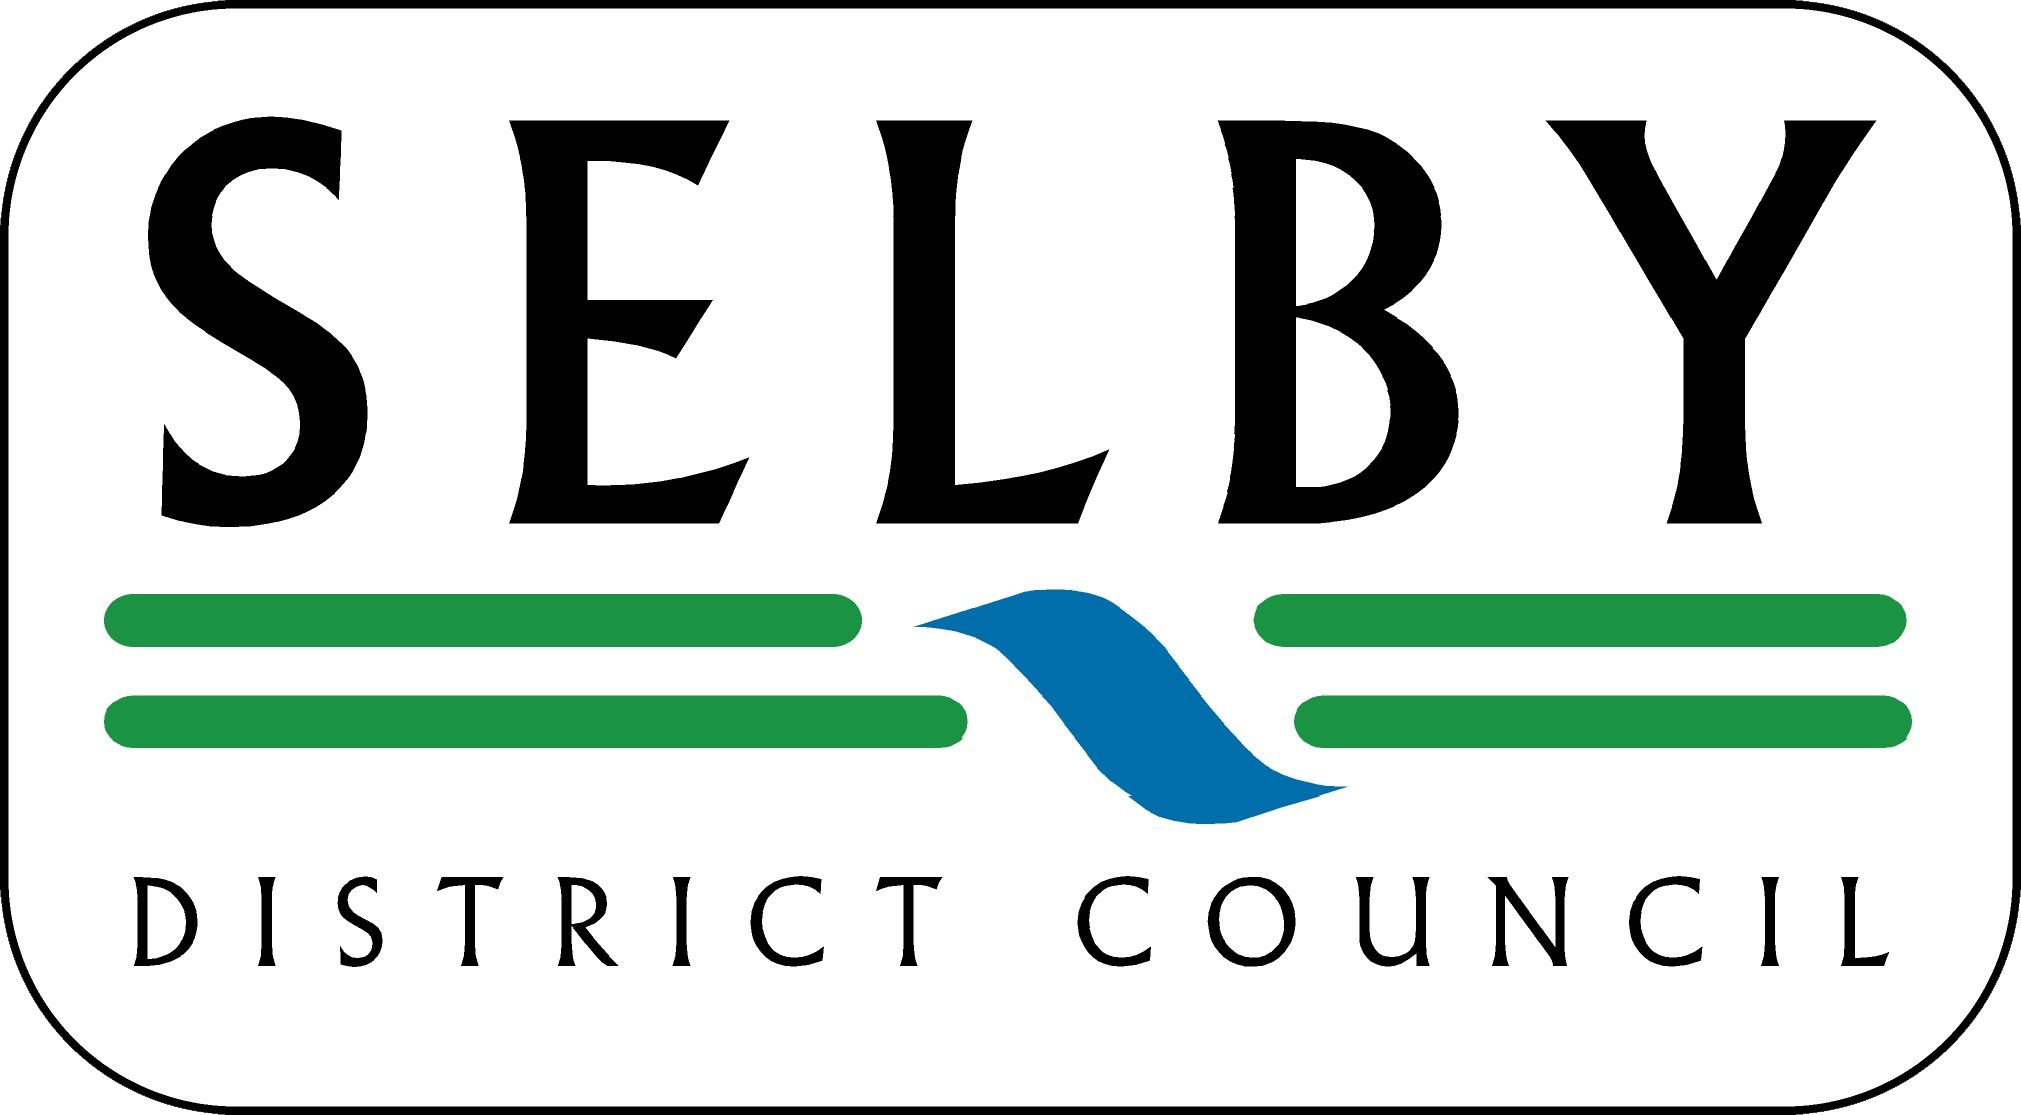 Selby District Council